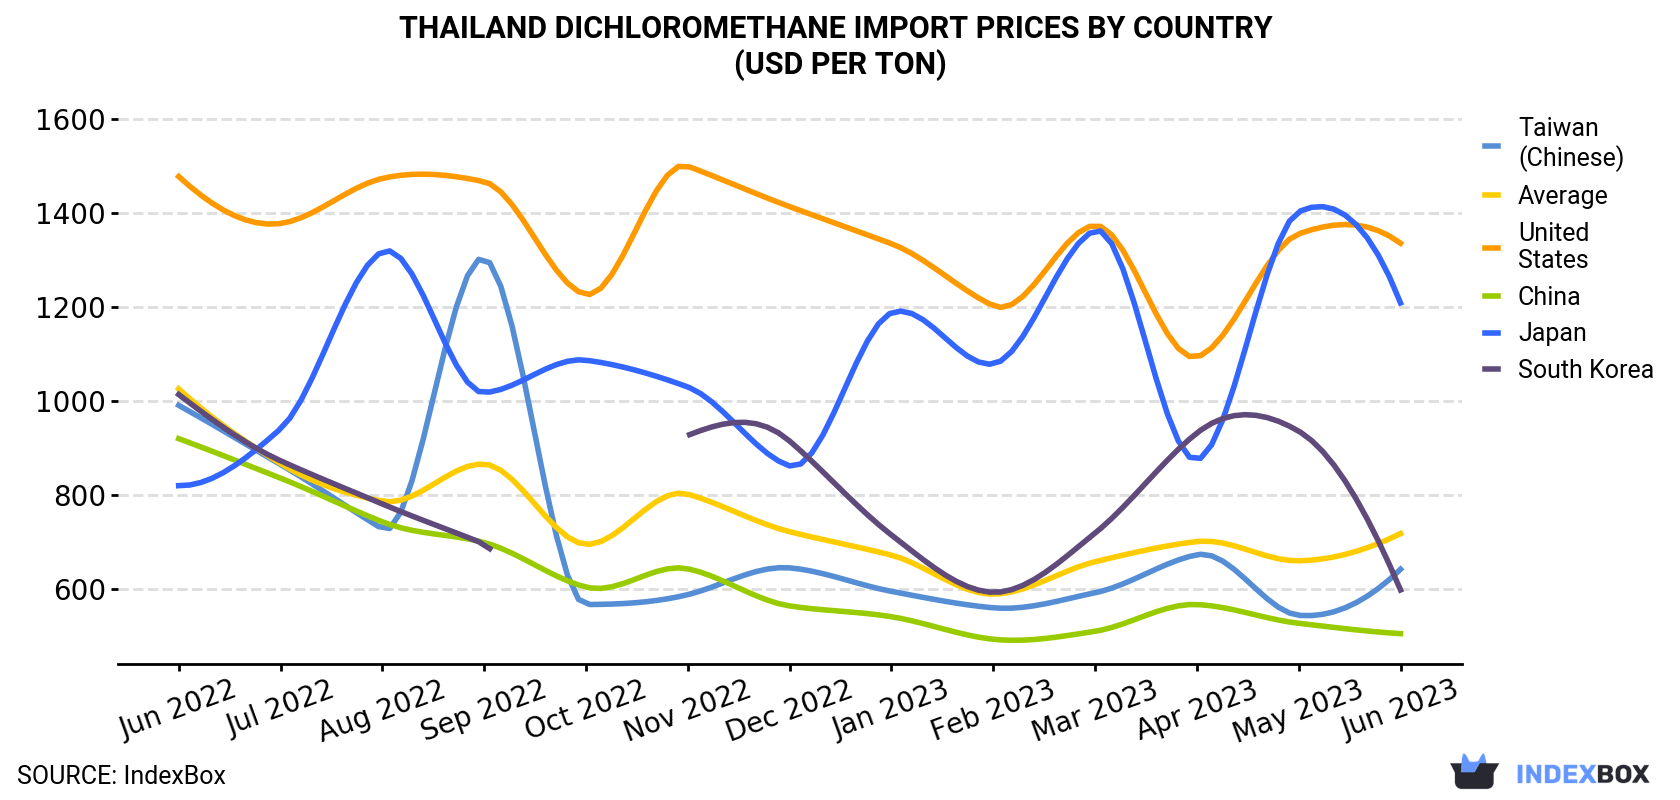 Thailand Dichloromethane Import Prices By Country (USD Per Ton)